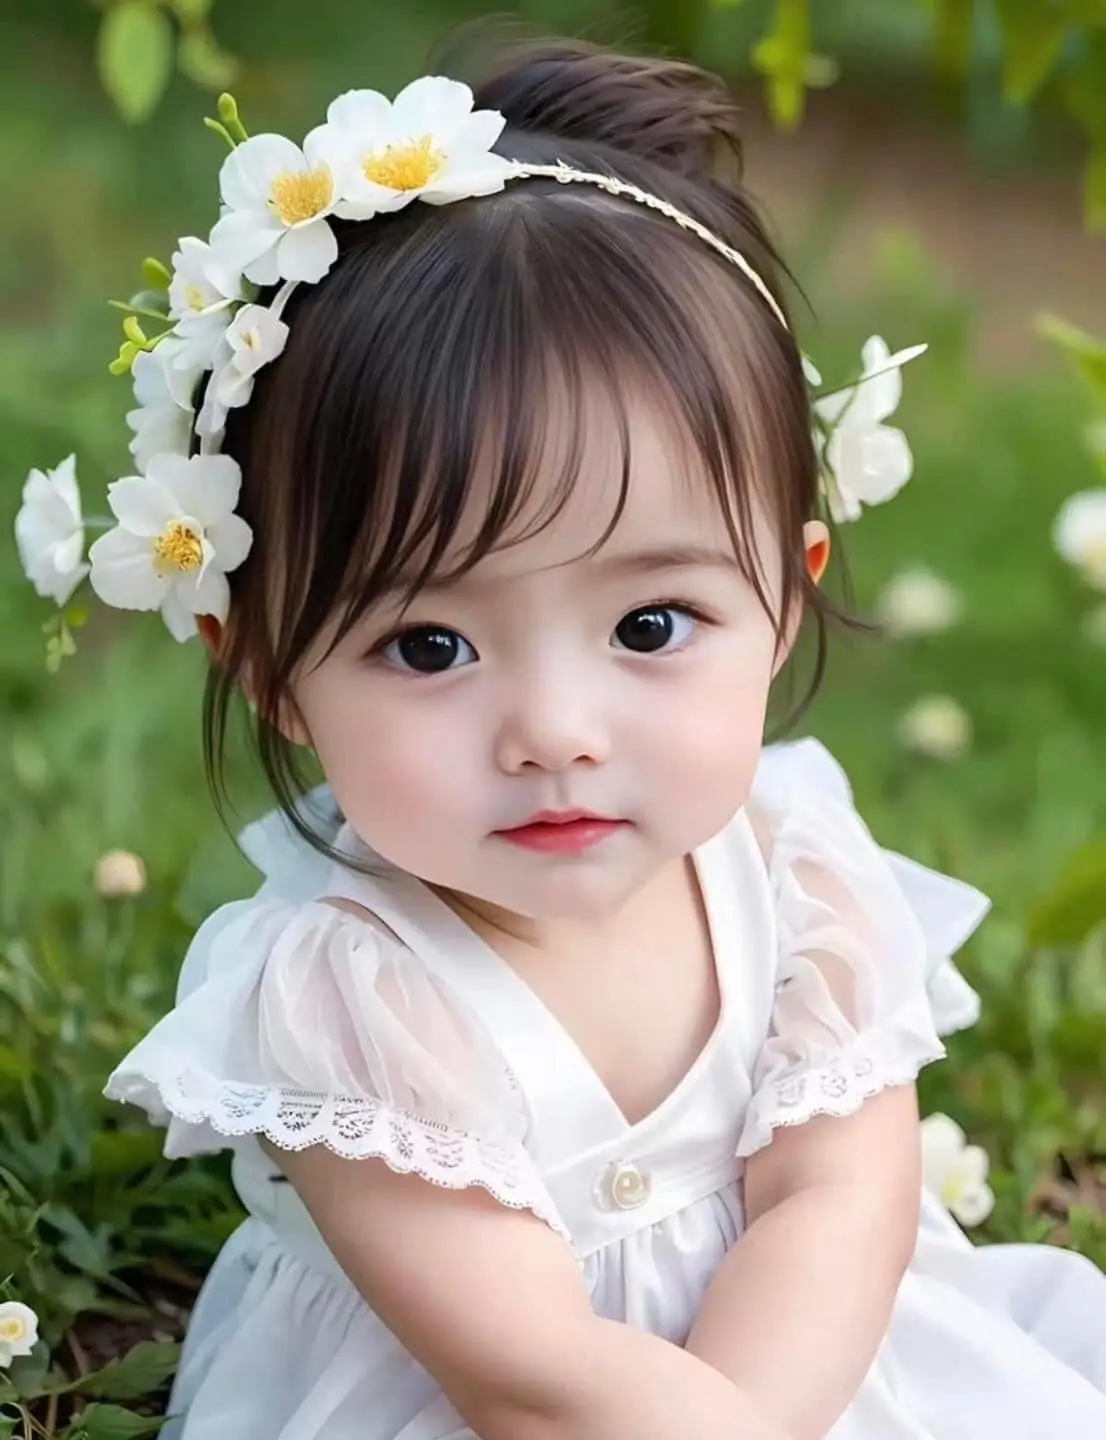 The Enchanting Charm: Adorable Moments of a Cute Baby with Big, Round Eyes Captivating Thousands of Followers